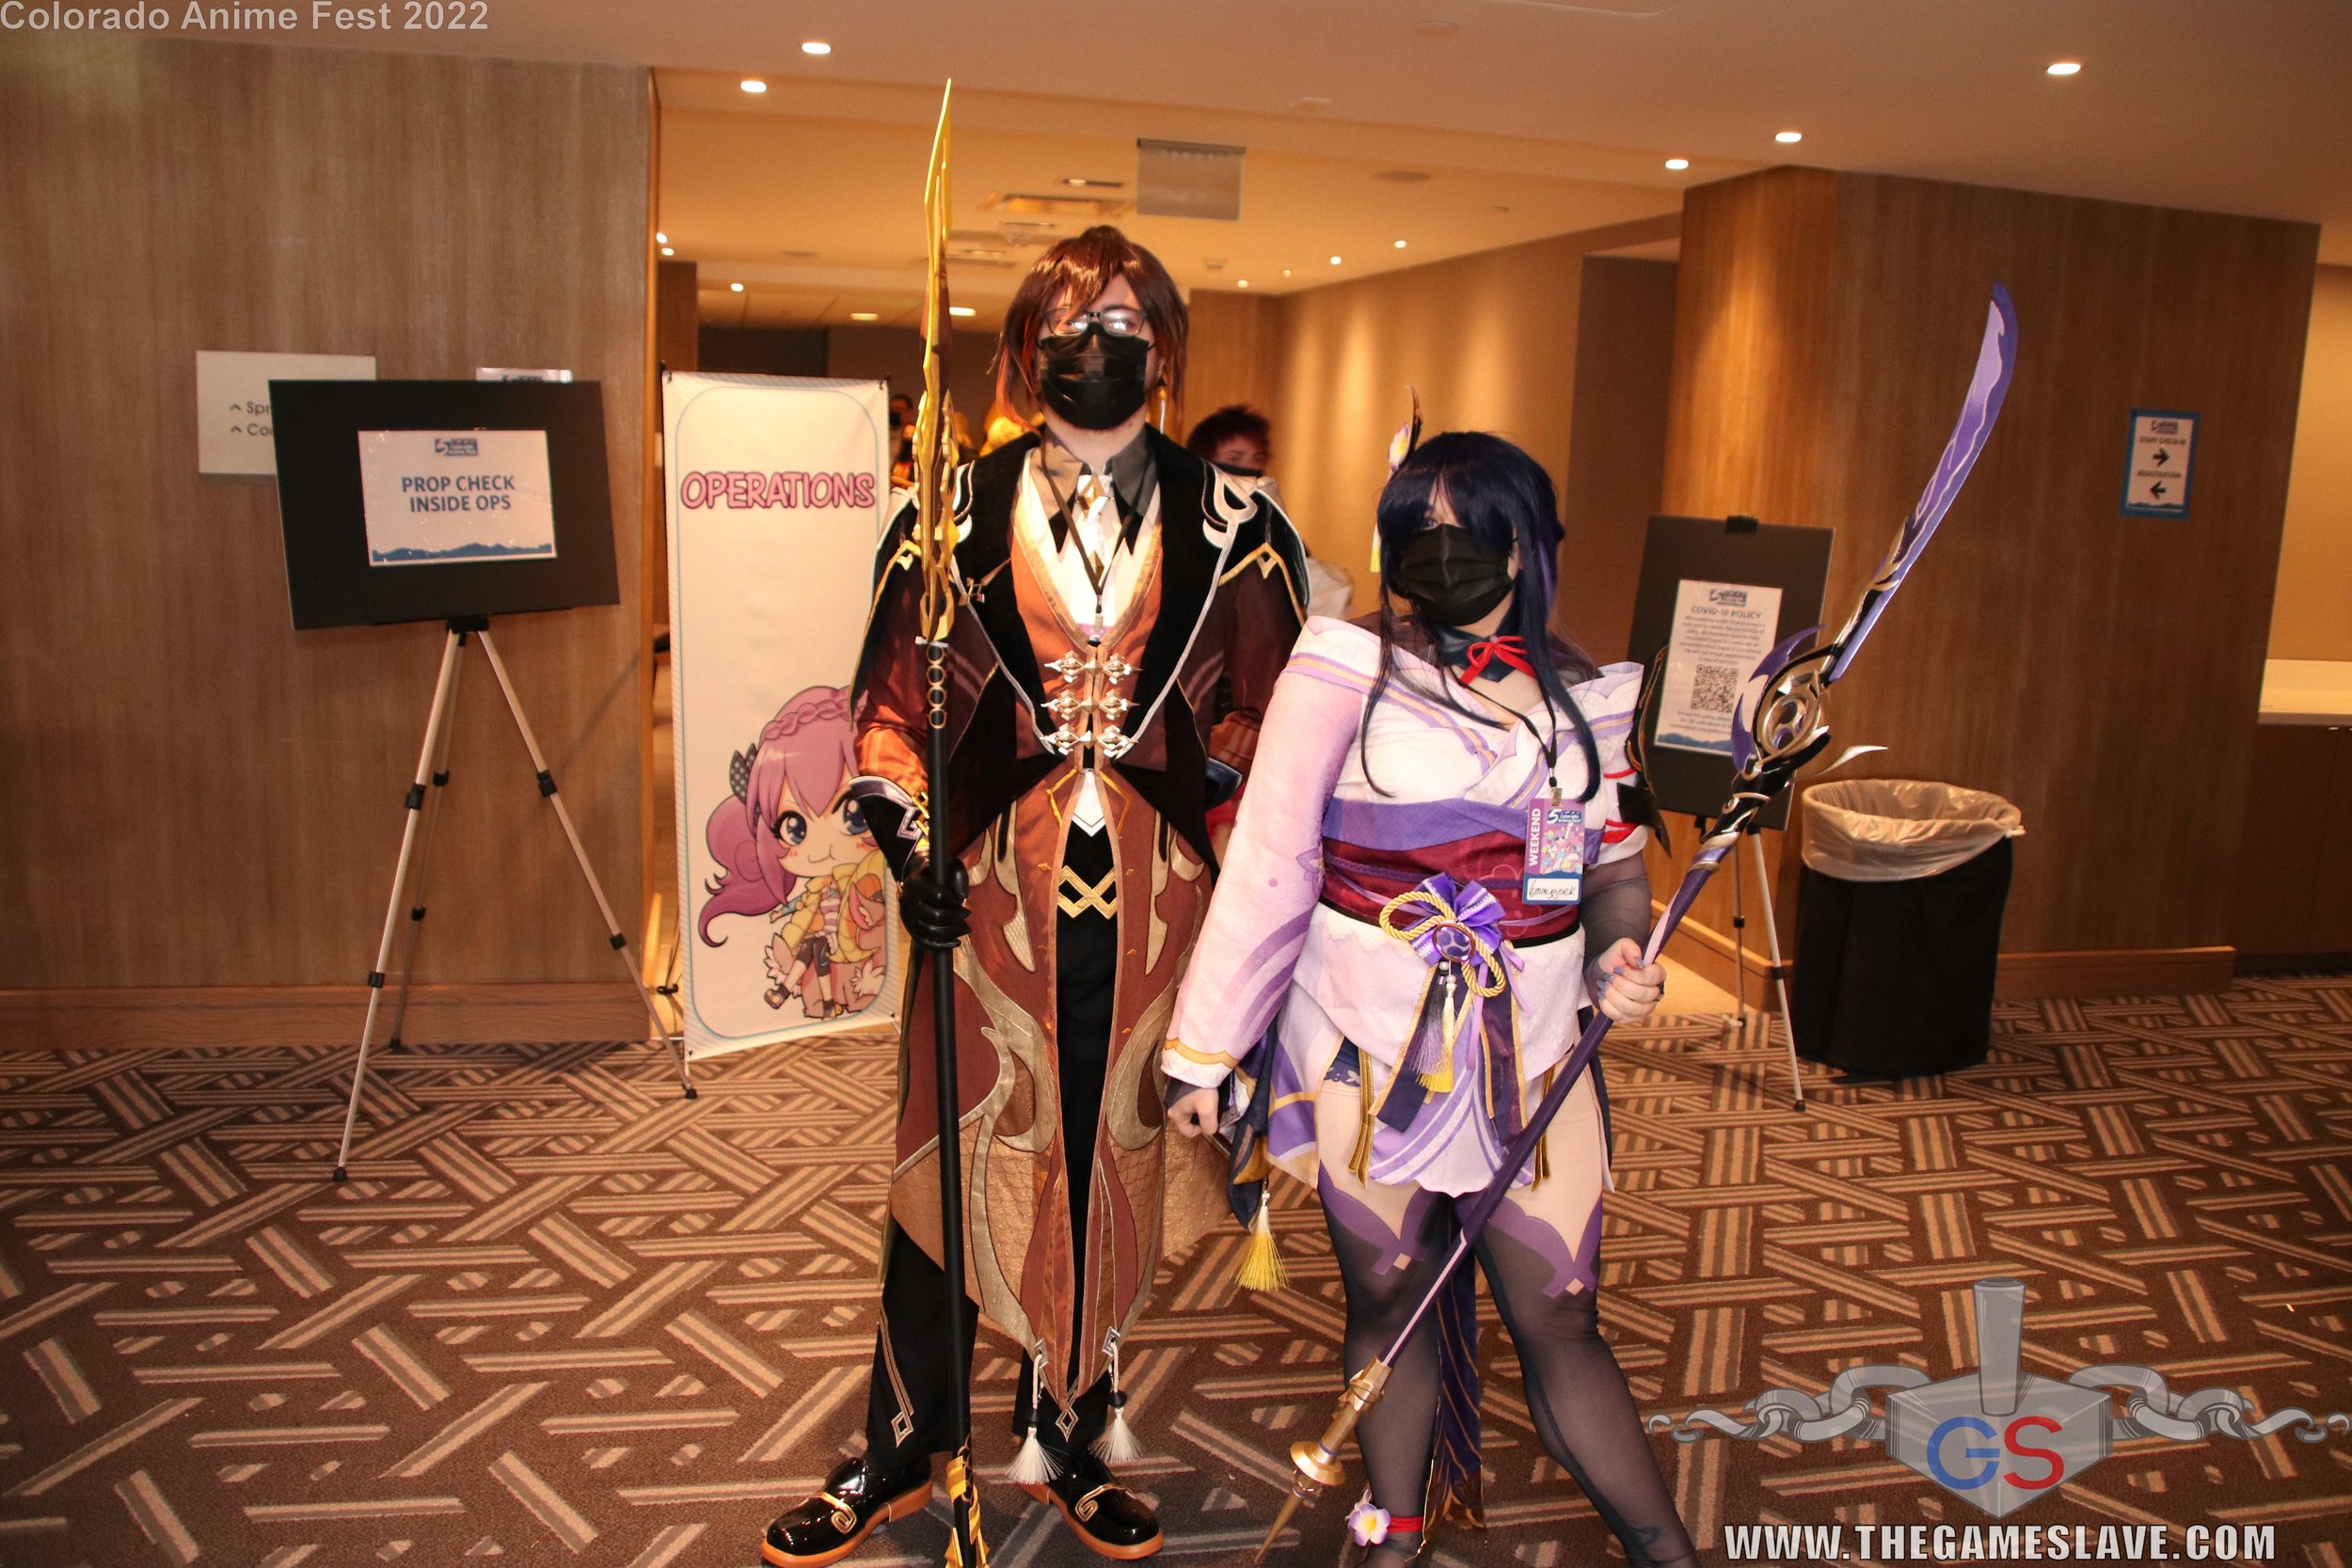 Colorado Anime Fest offers a safe place for thousands of attendees  The  Denver Post